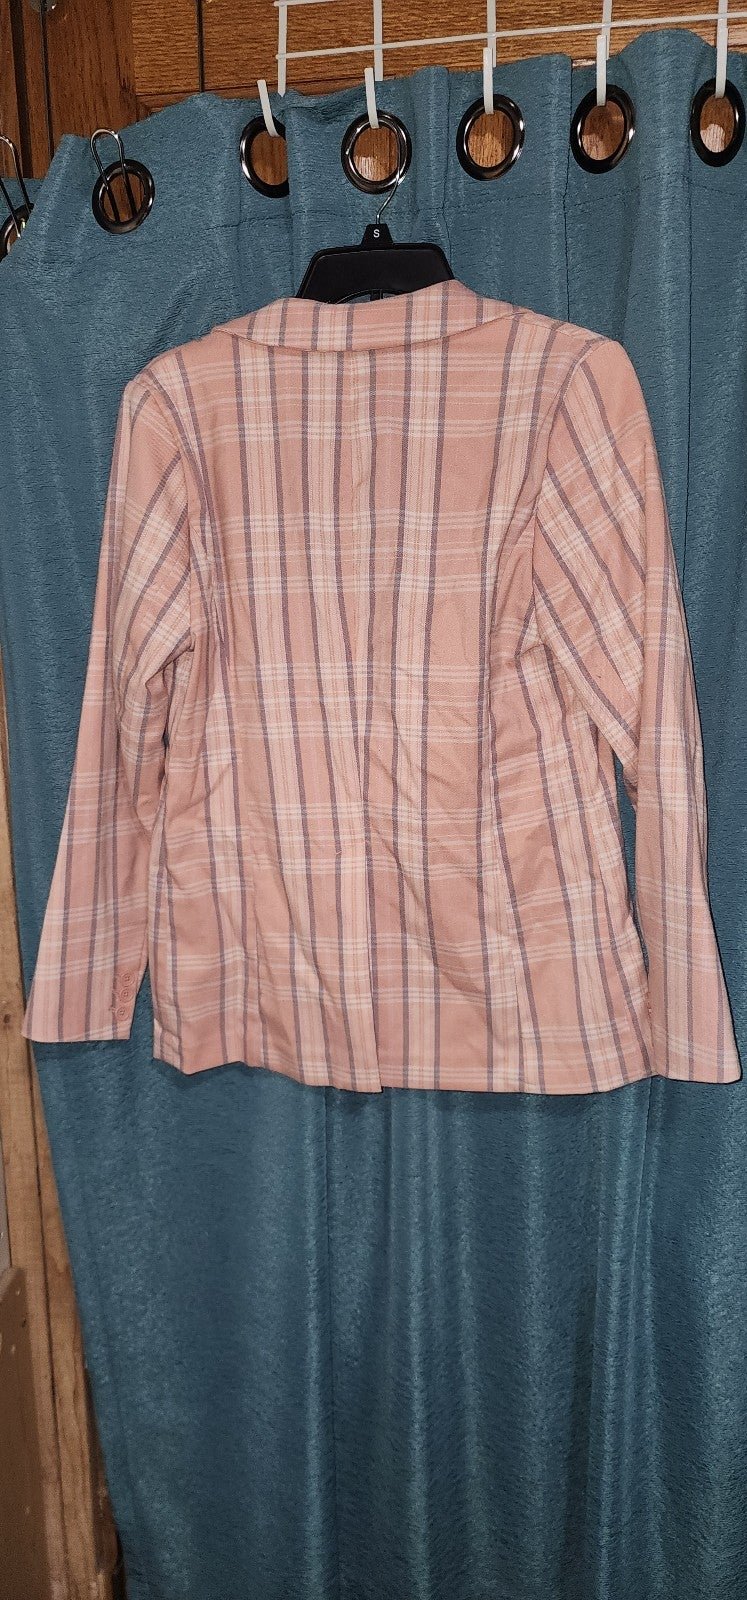 cheapest place to buy  LC Lauren Conrad Relaxed Pink Blazer  Plaid Stripe Long Sleeve Button Pockets fzB2kyBIQ Outlet Store